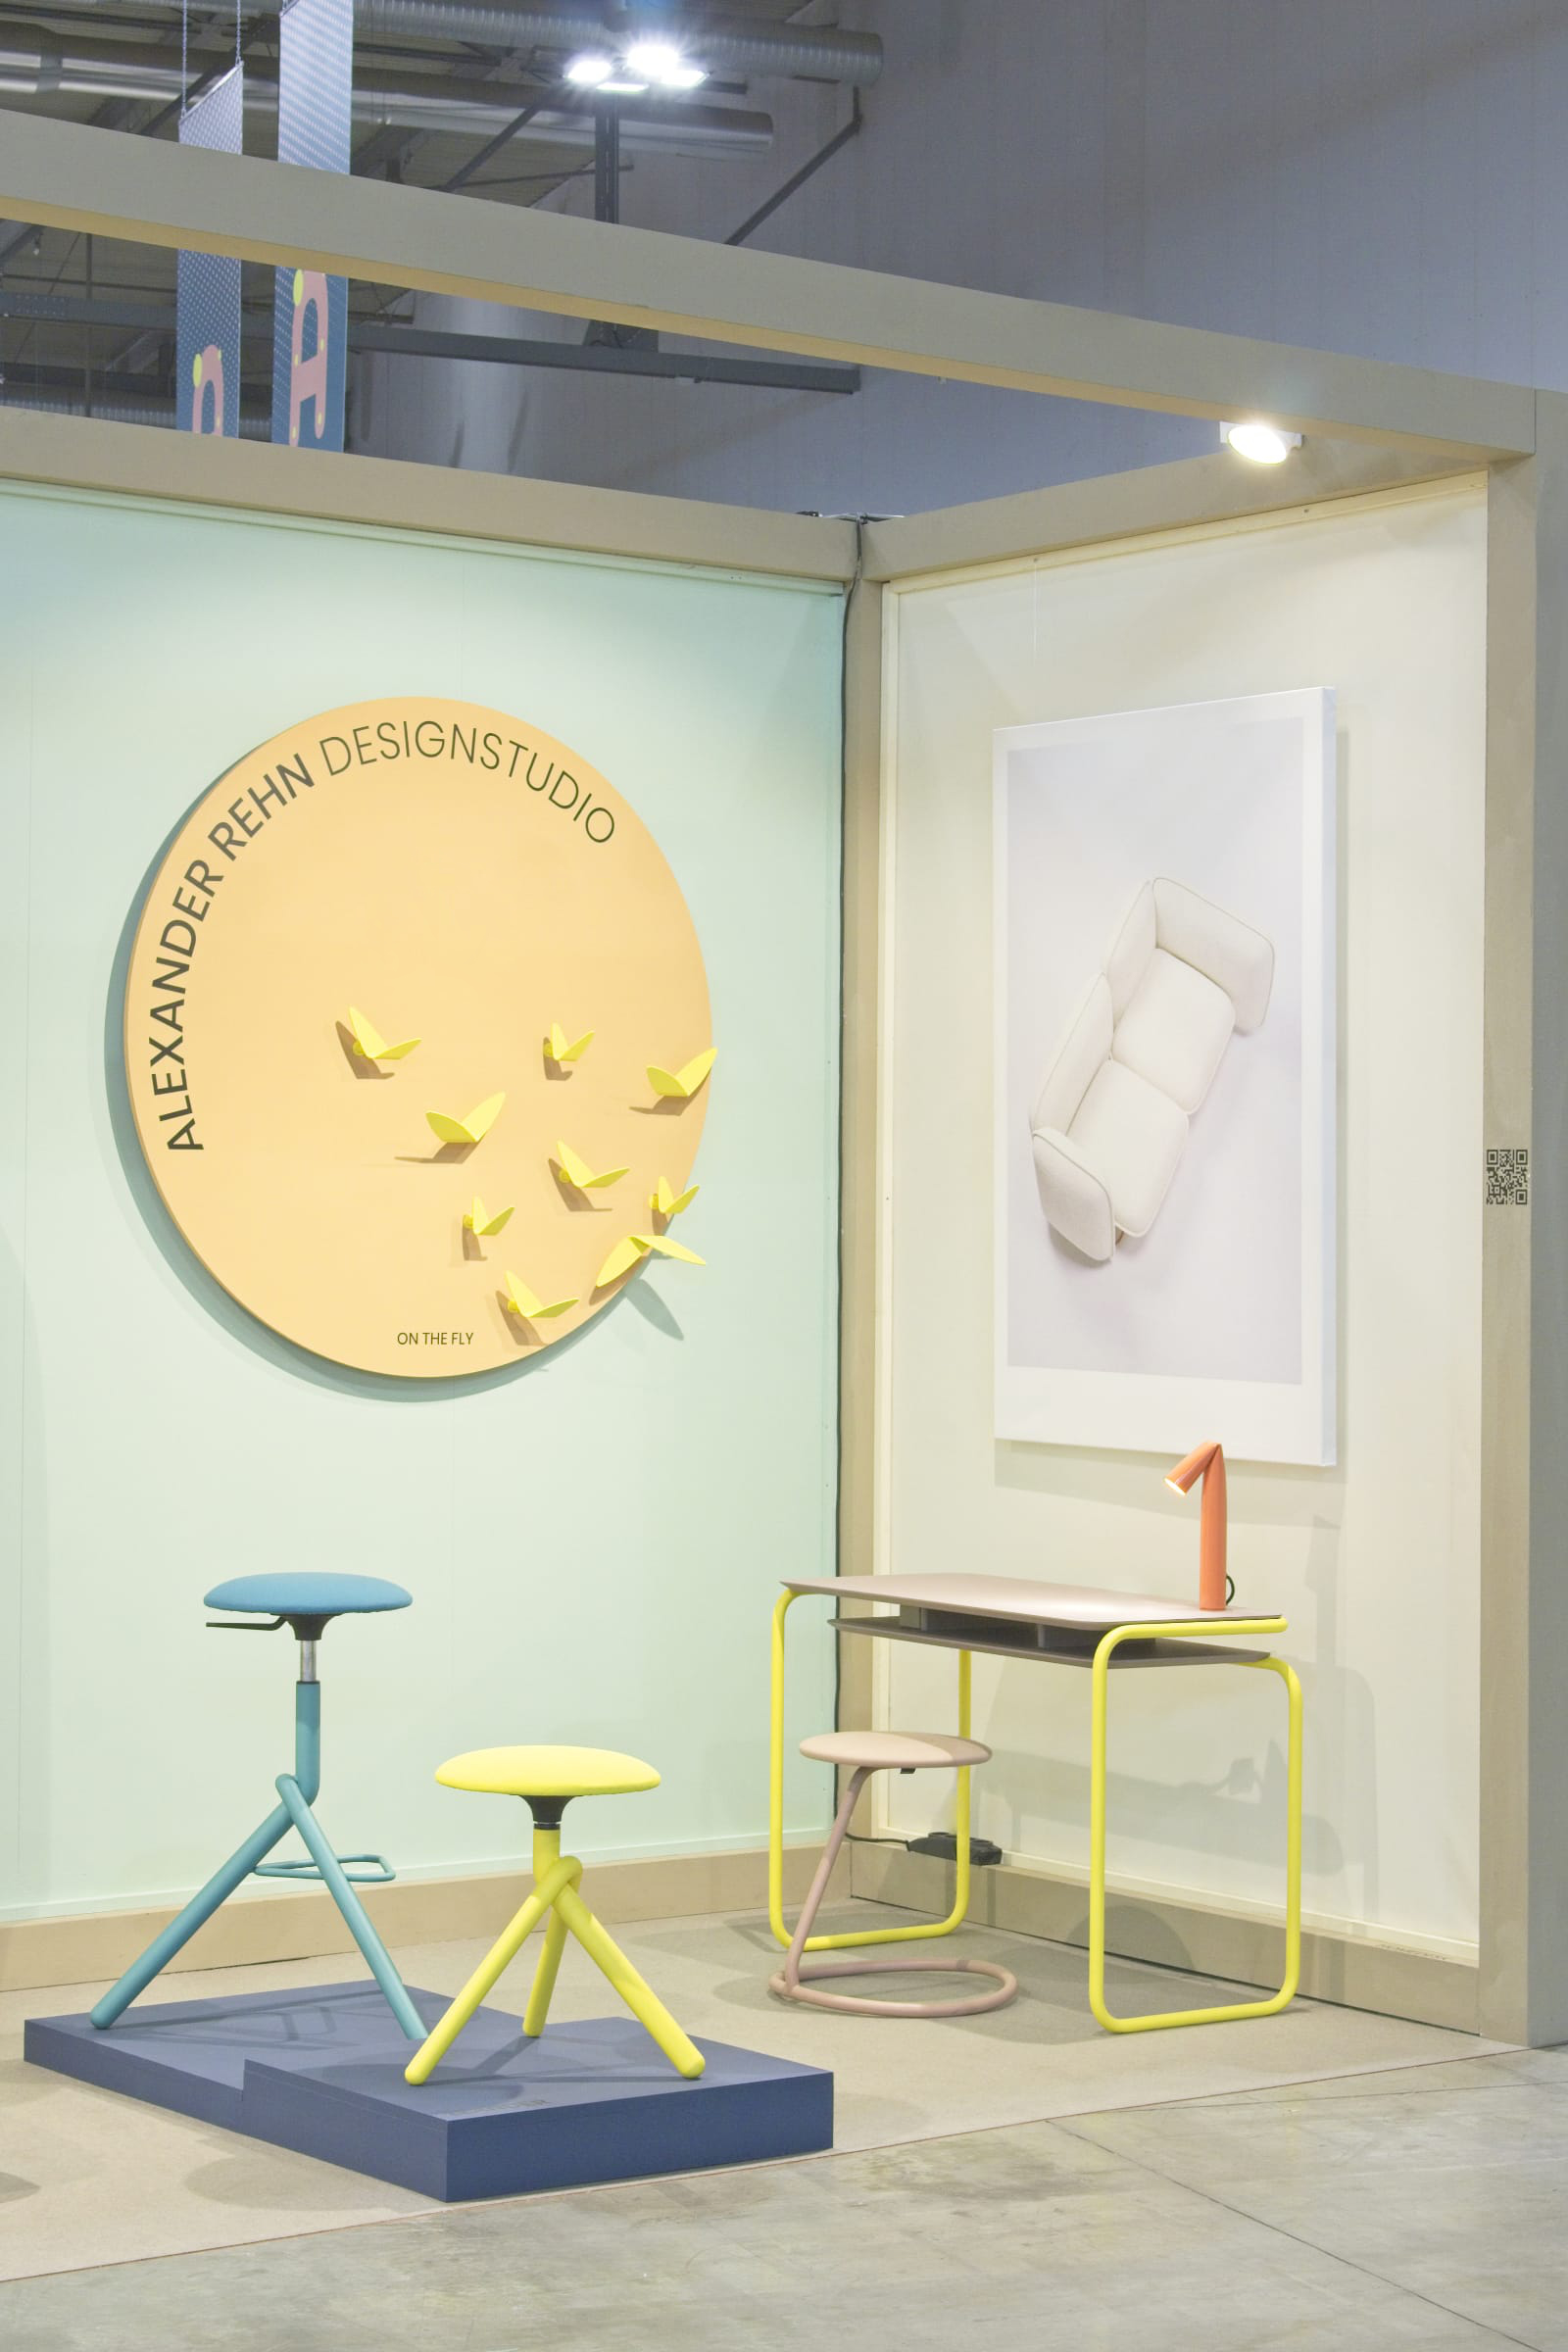 Introducing new furniture at the salone satellite in milan